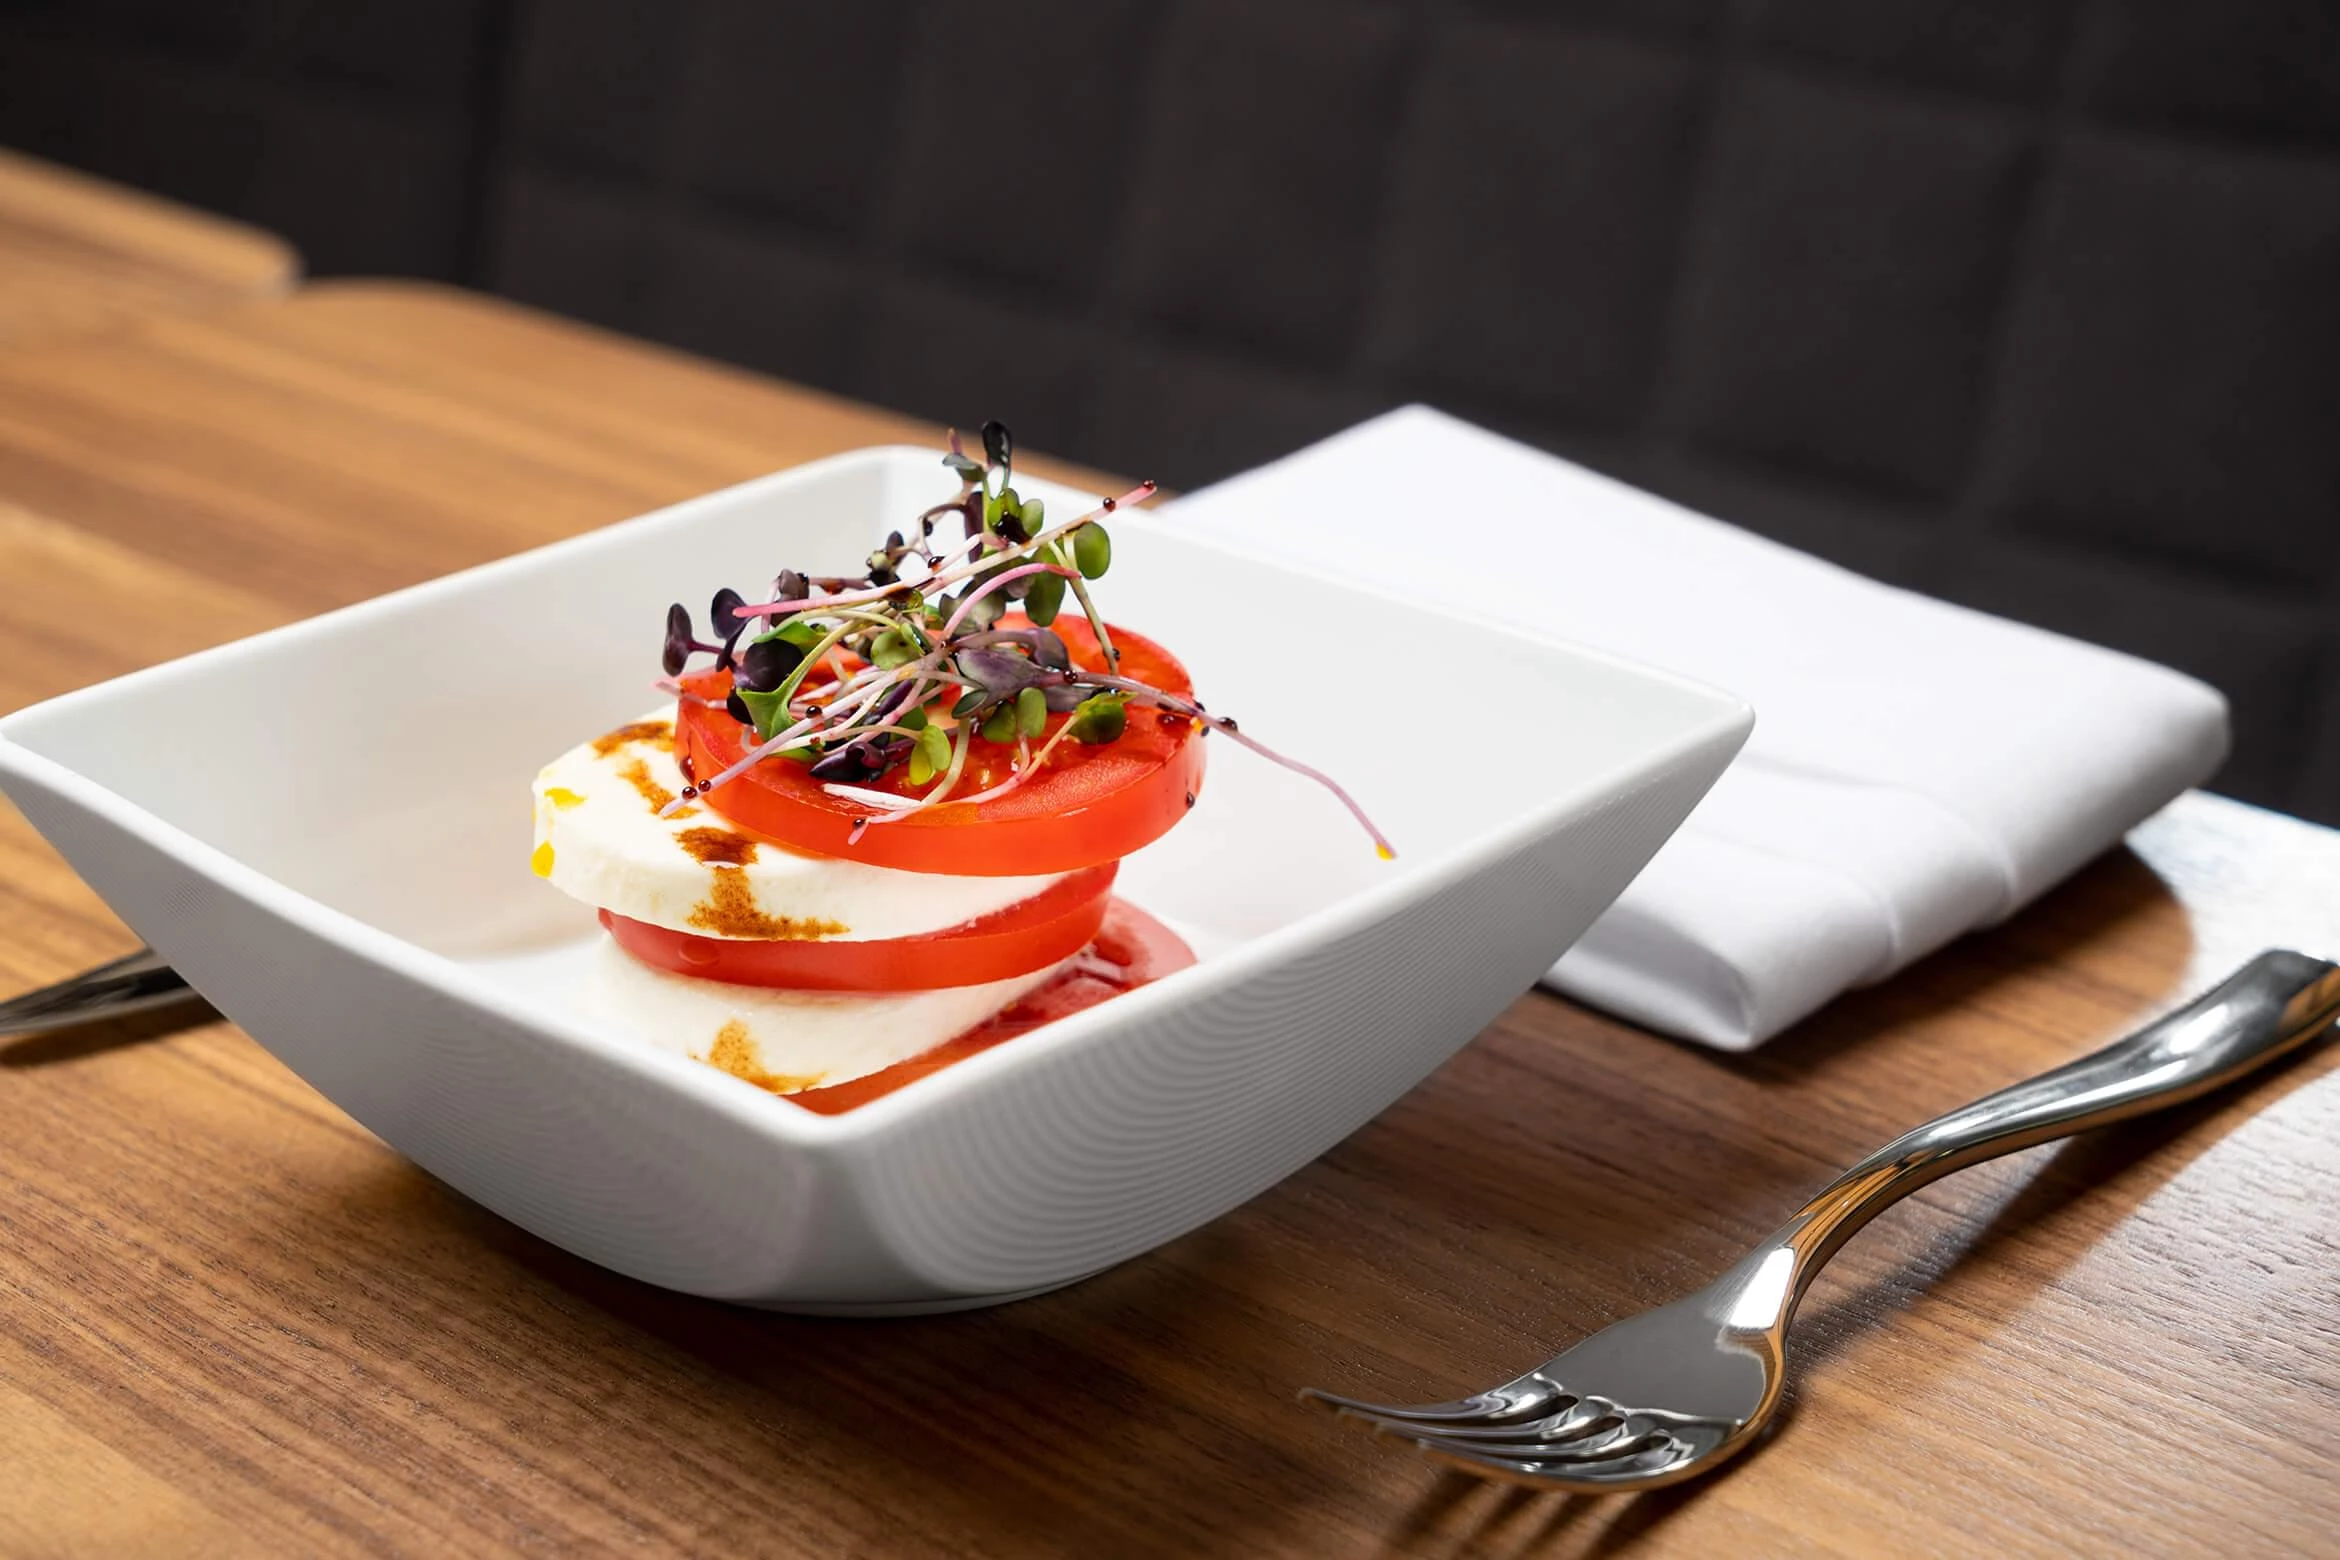 A bowl of mozzarella and tomato salad drizzled with balsamic.